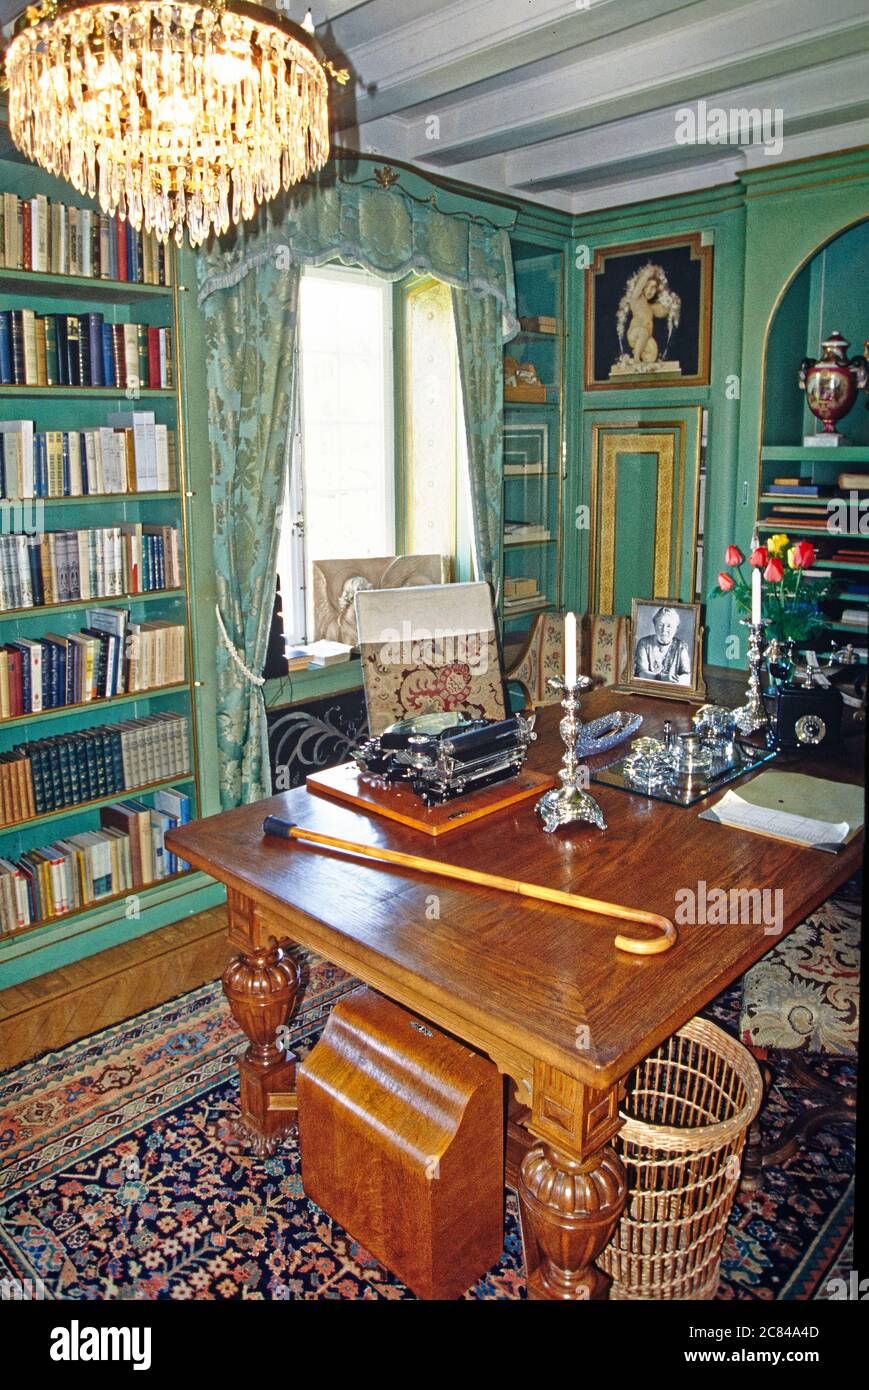 Interior view of the study at Selma Lagerloefs house Marbacka, Vaermland, Sweden, Europe Stock Photo